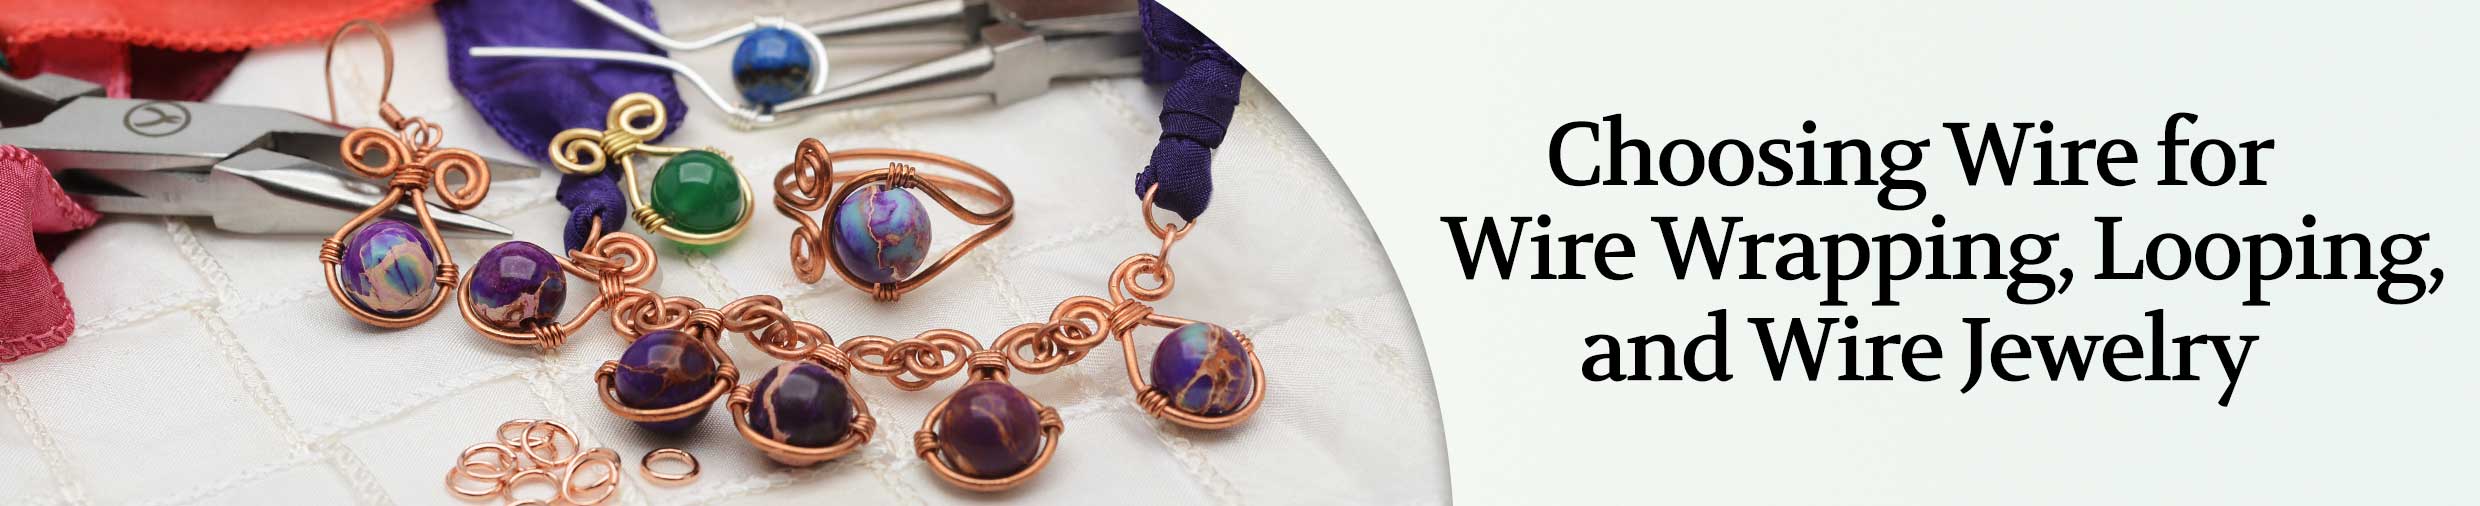 Product Guide: Choosing Wire for Wire Wrapping, Wire Looping, and Wire Jewelry